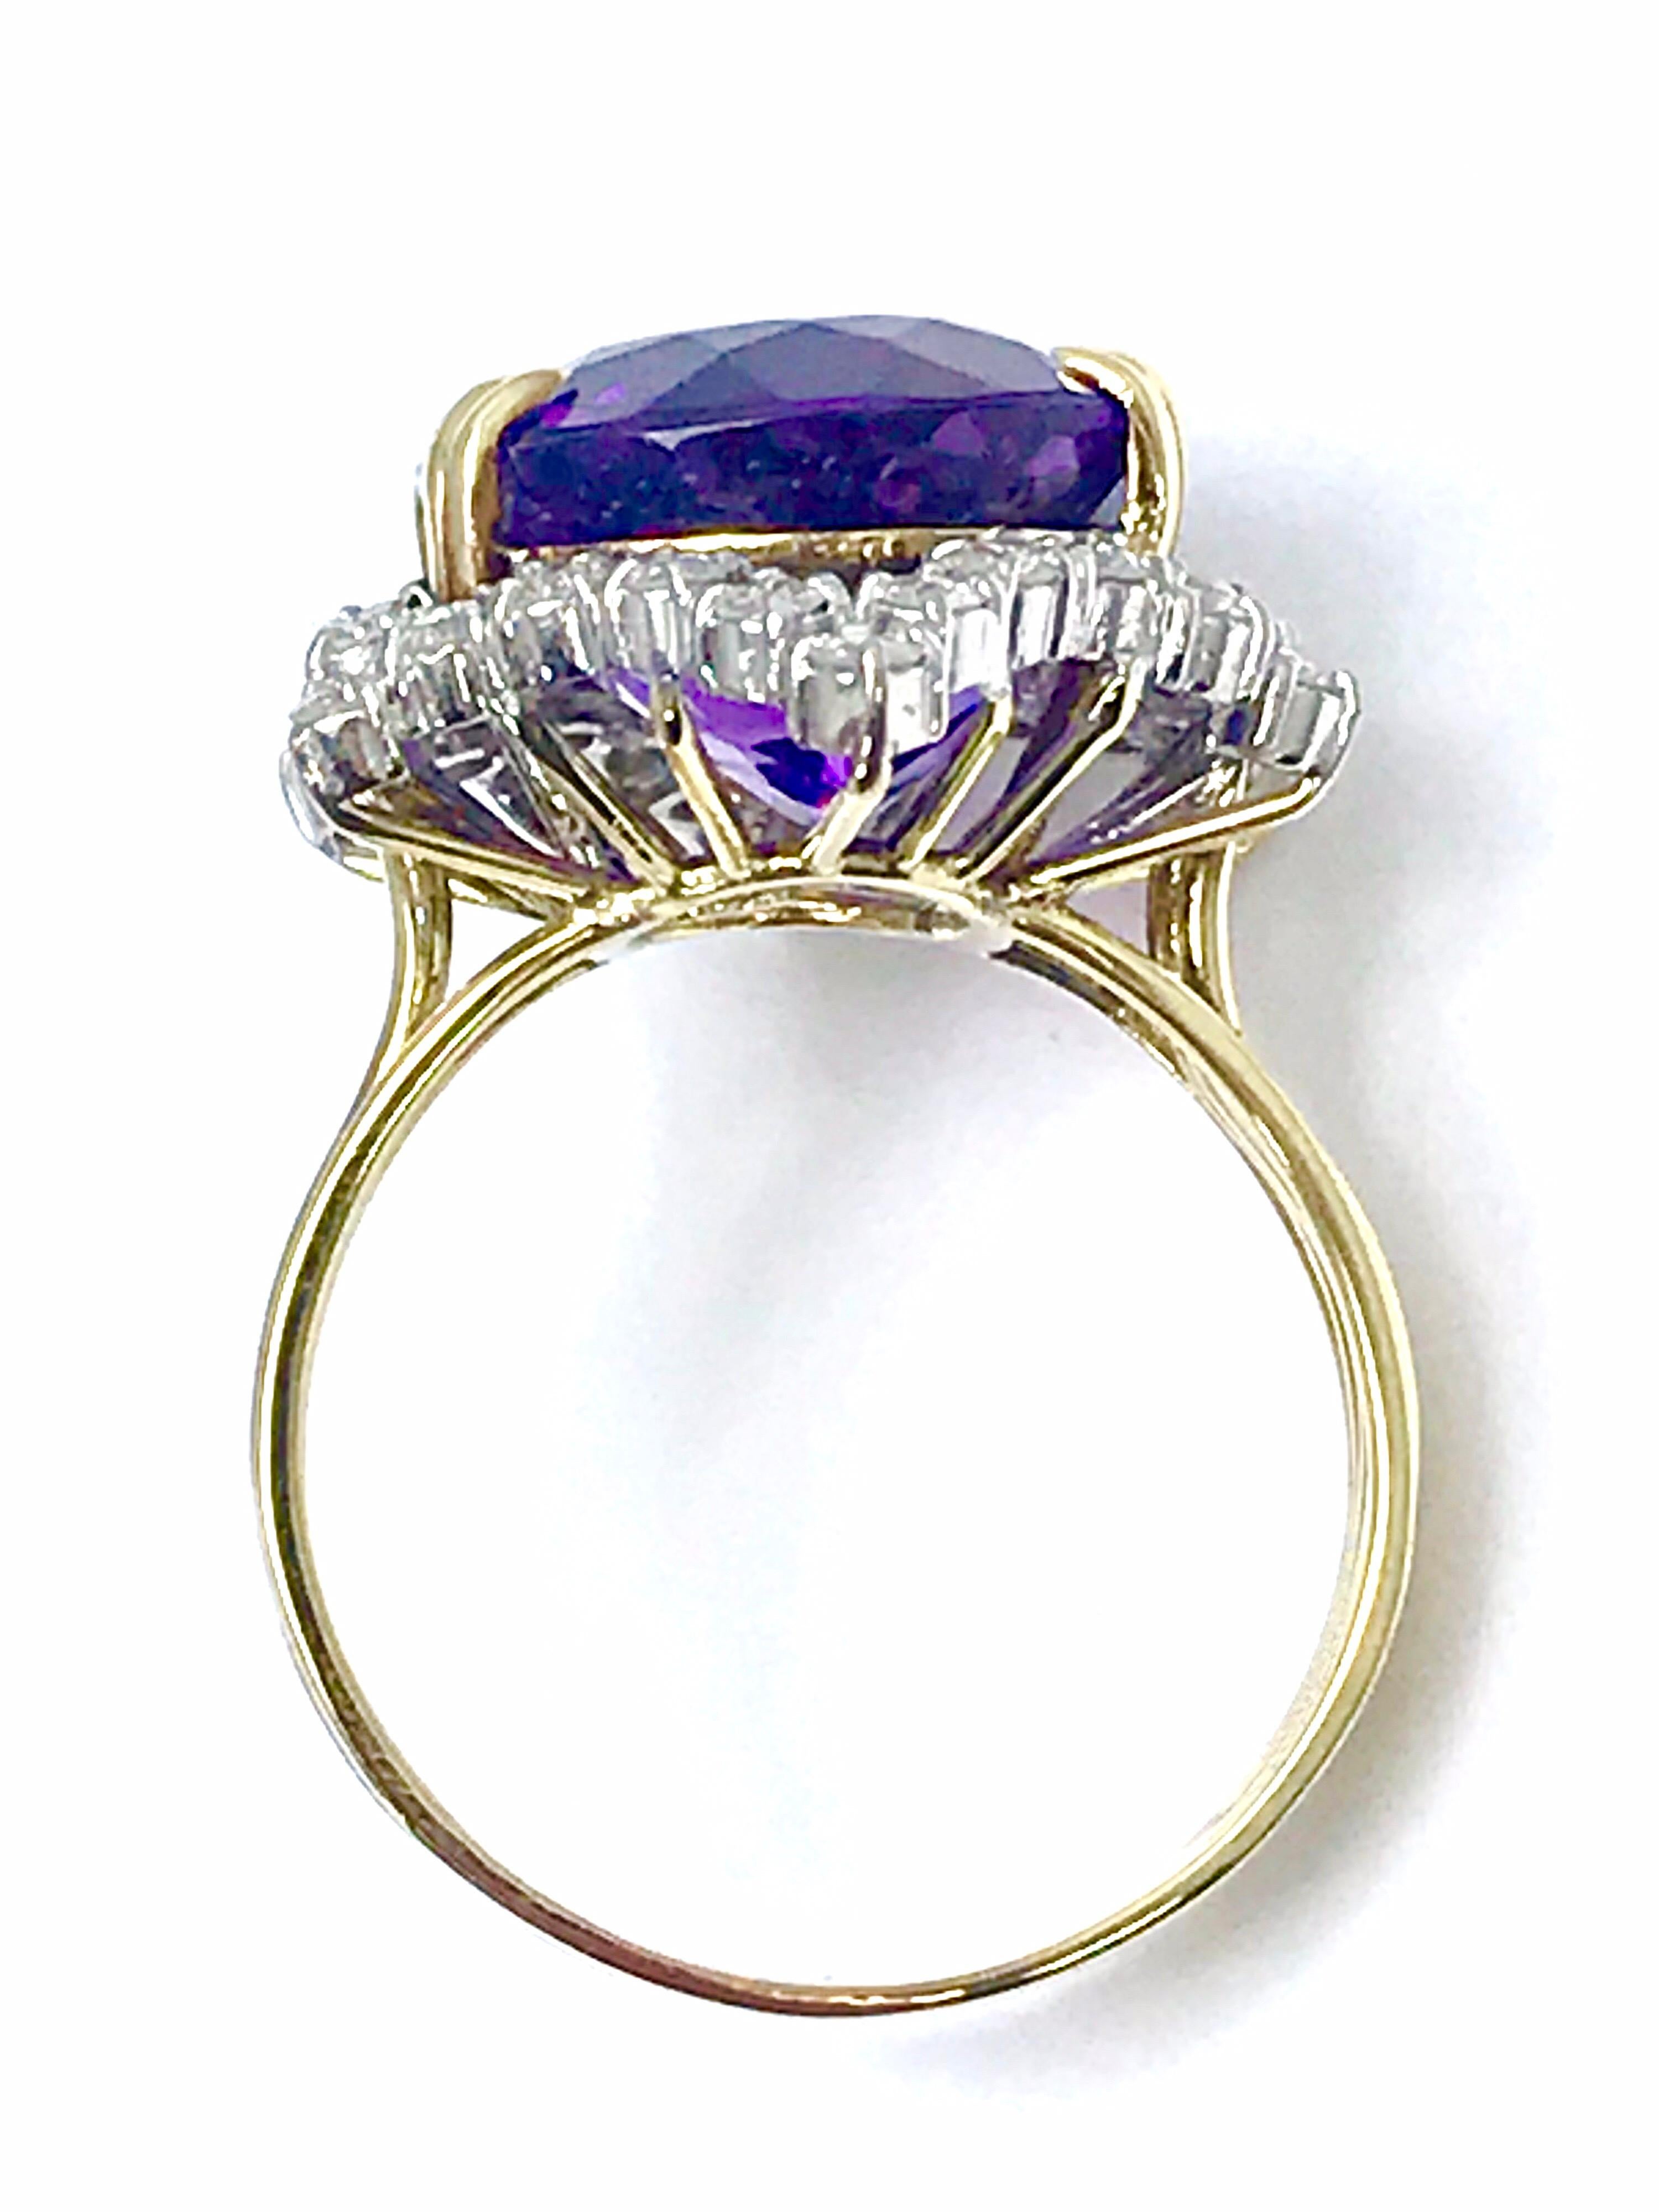 Women's or Men's 12.20 Carat Oval Amethyst and Round Diamond Cocktail Ring